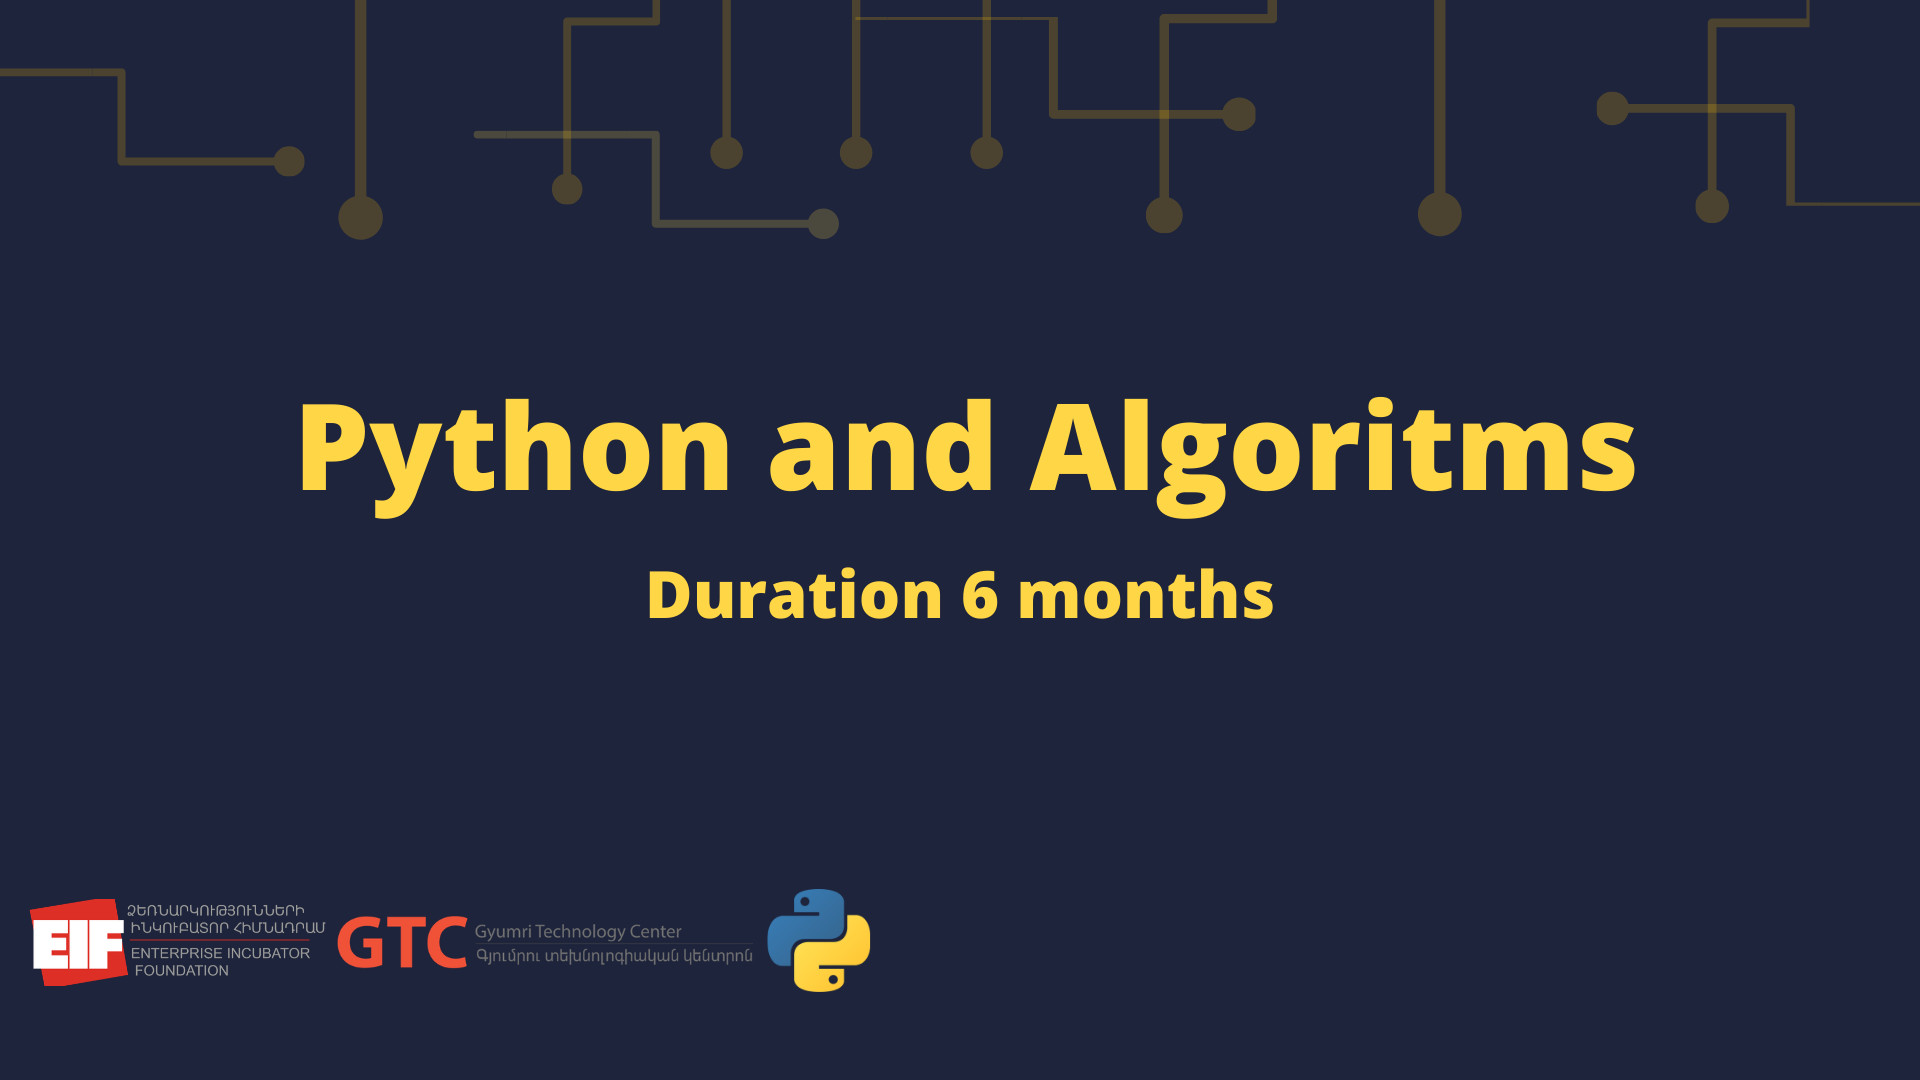 Python Programming and Theory of Algorithms